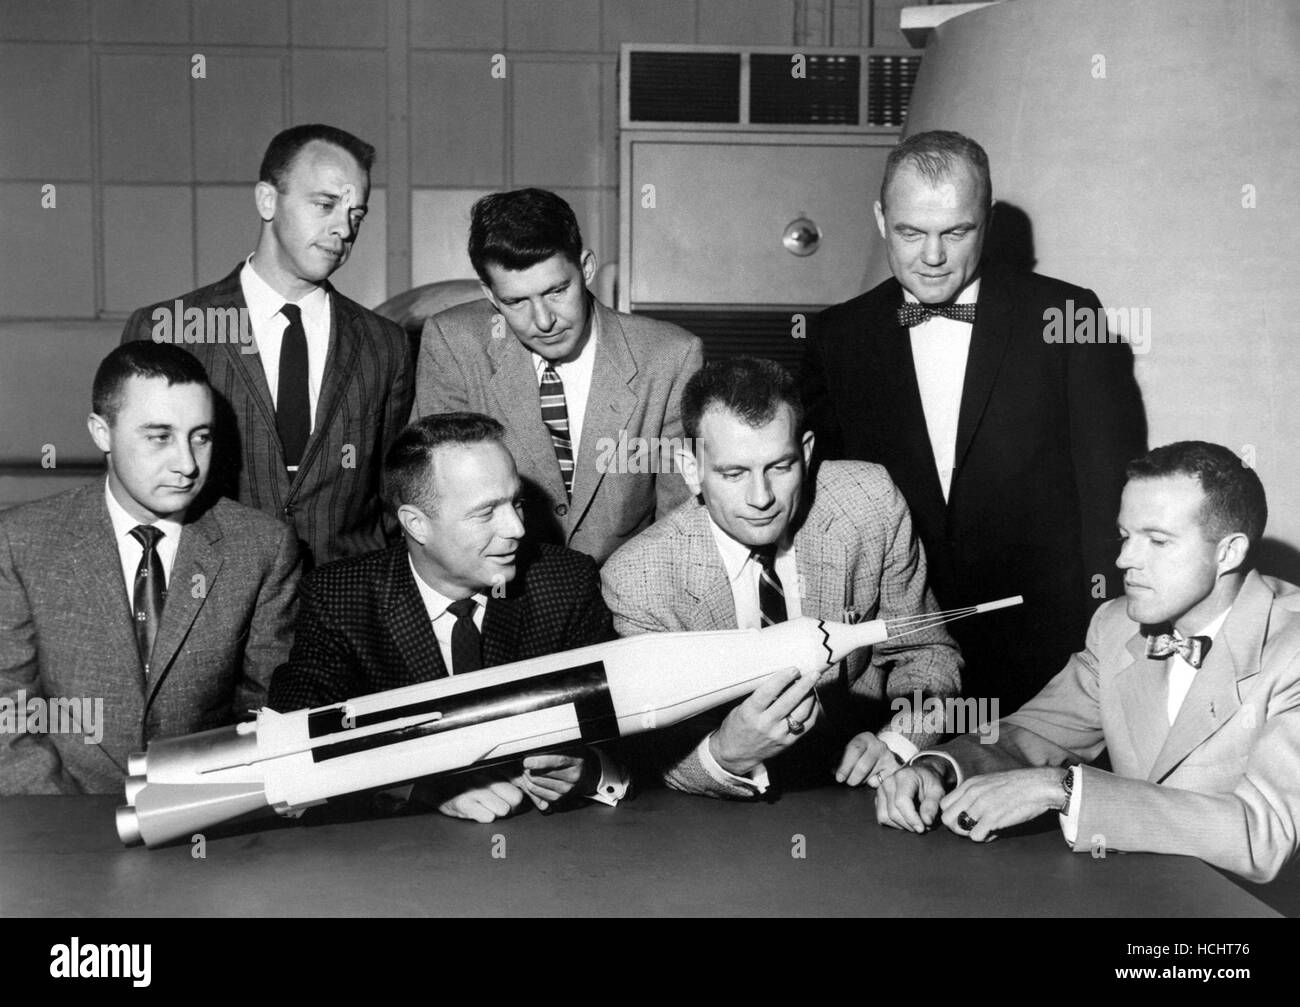 The Original 7 Mercury Astronauts are pictured around a table admiring an Atlas model on April 30, 1959. Standing, left to right are Alan B. Shepard, Jr., Walter M. Schirra, Jr., and John H. Glenn, Jr.; sitting, left to right are Virgil I. Grissom, M. Scott Carpenter, Donald Slayton, and L. Gordon Cooper, Jr. The Mercury 7 astronauts were introduced to the American public in April 1959. The seven criteria for selection were as follows: 1. less than 40 years old; 2. less than 5 foot 11 inches tall: 3. excellent physical condition; 4. bachelor's degree in engineering or equivalent; 5. test-pilot Stock Photo